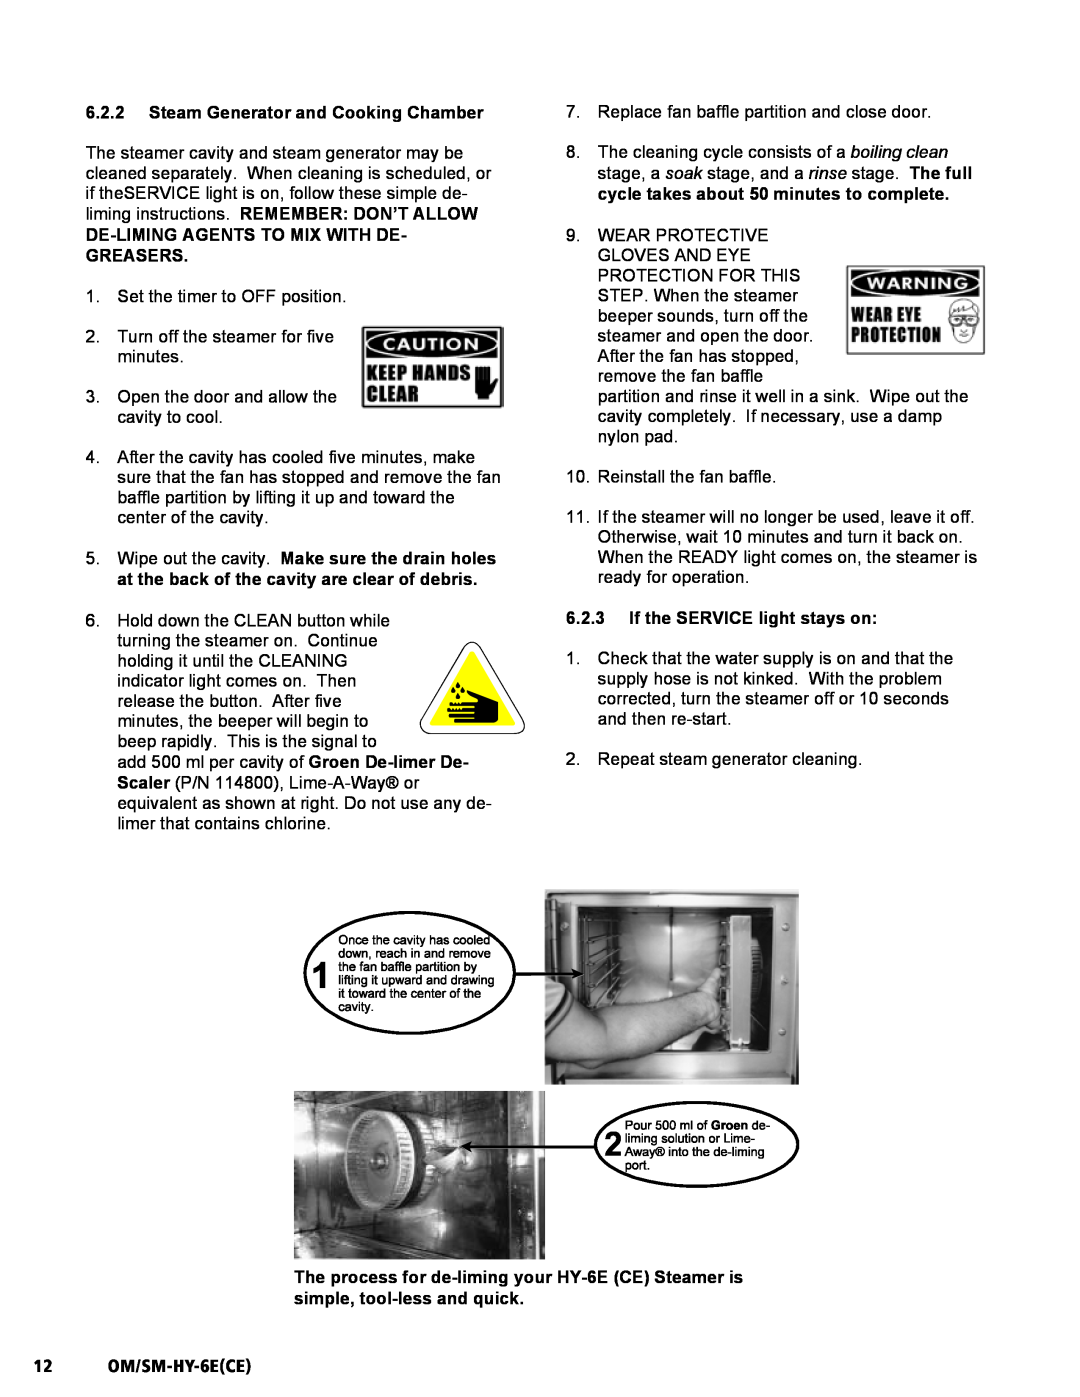 Unified Brands HY-6E(CE) service manual 6.2.2Steam Generator and Cooking Chamber, De-Limingagents To Mix With De- Greasers 